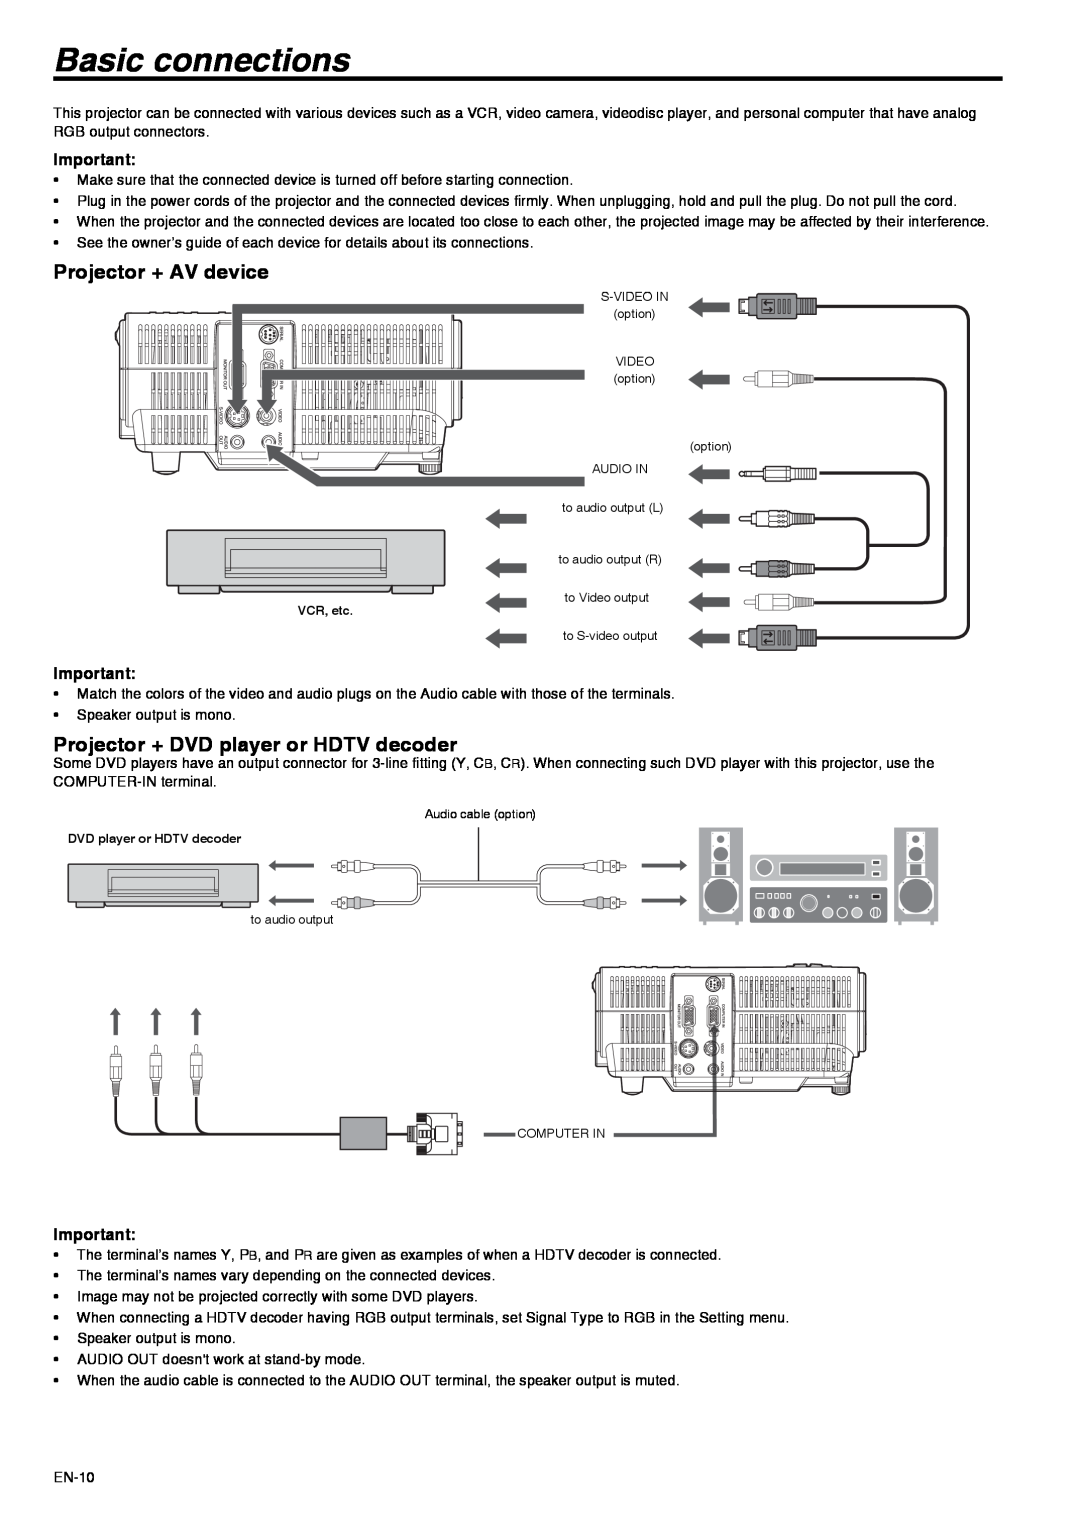 Mitsubishi Electronics XD211U user manual Basic connections, Projector + AV device, Projector + DVD player or HDTV decoder 